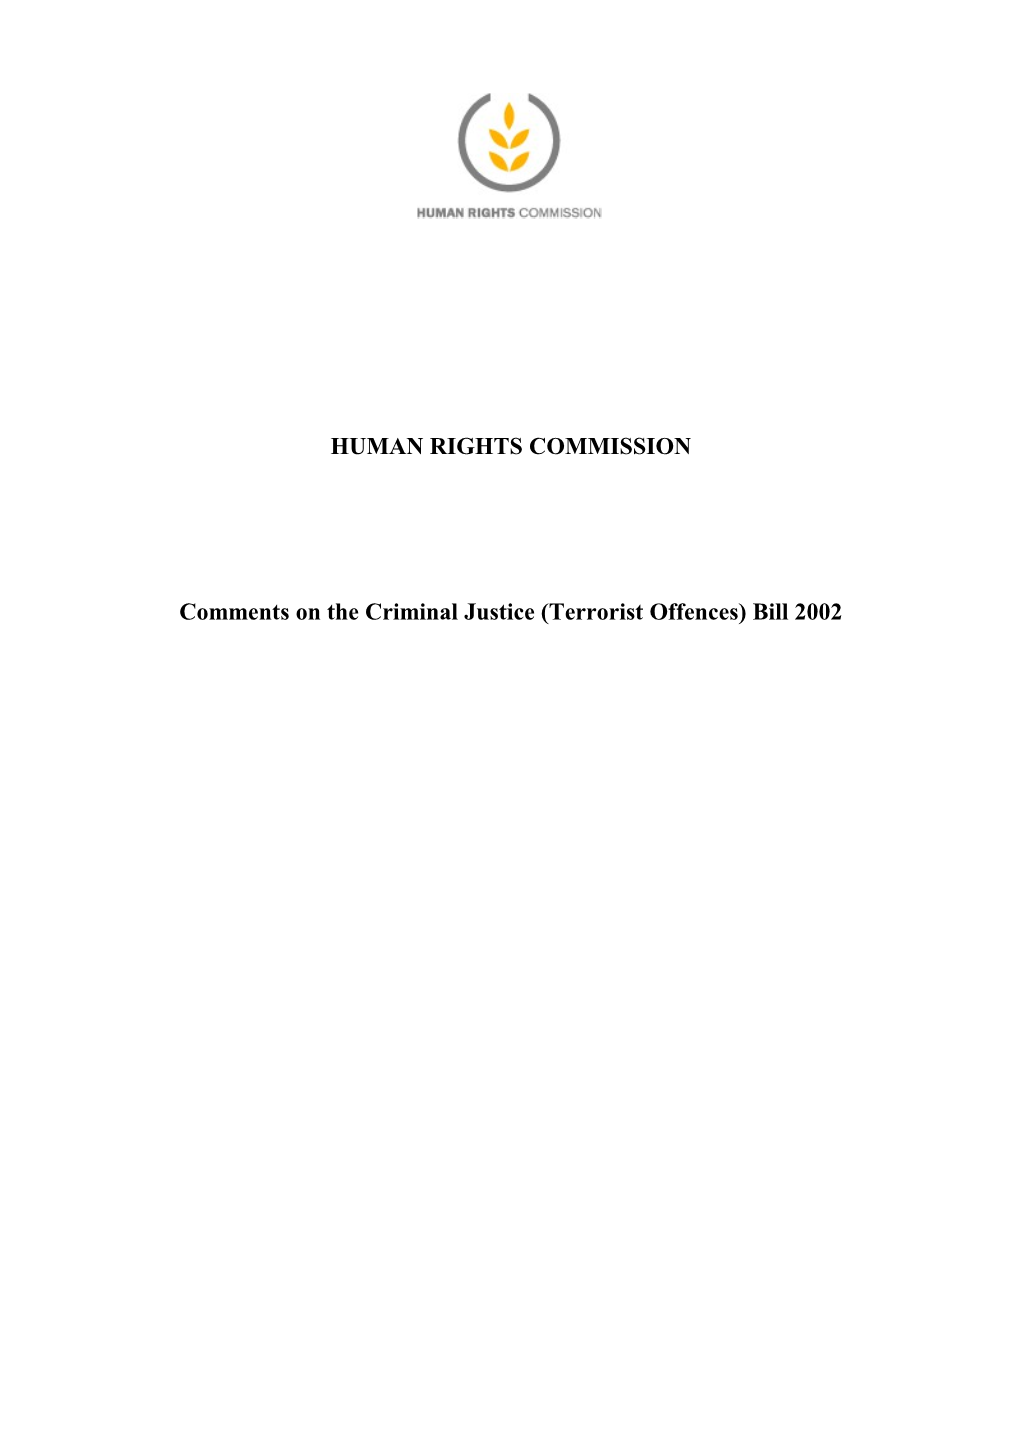 Comments on the Criminal Justice (Terrorist Offences) Bill 2002